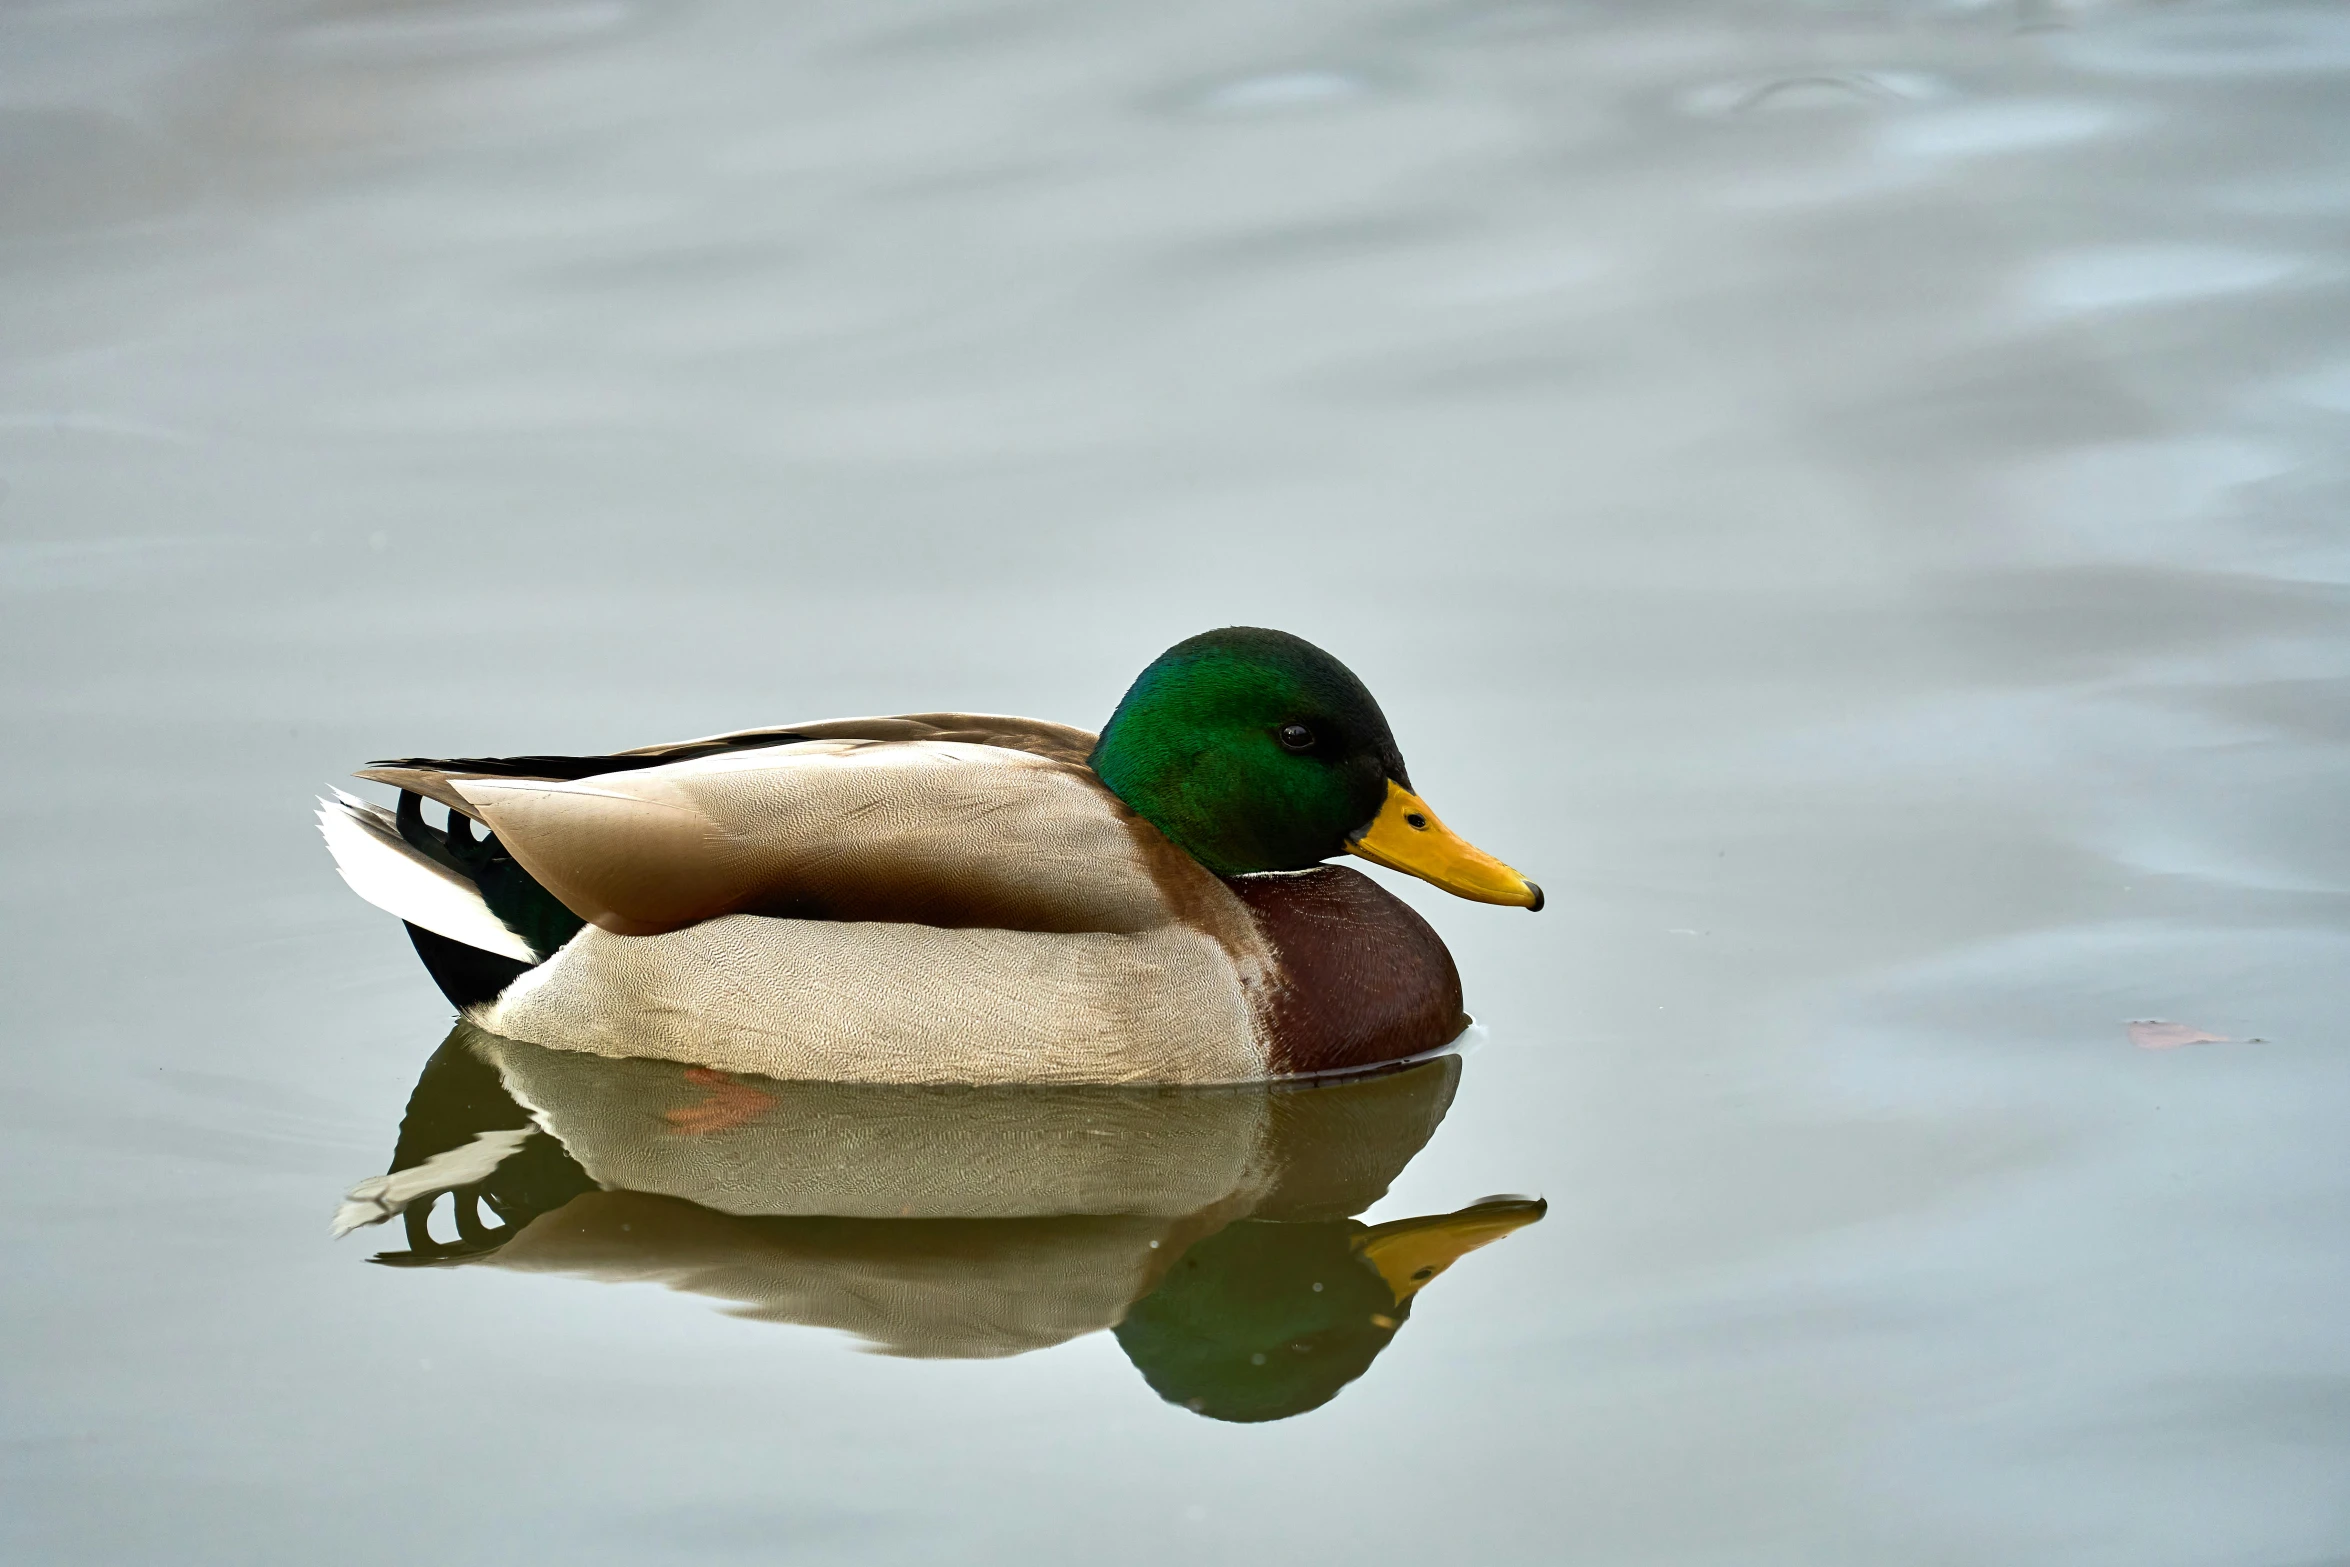 an image of a duck swimming in the water